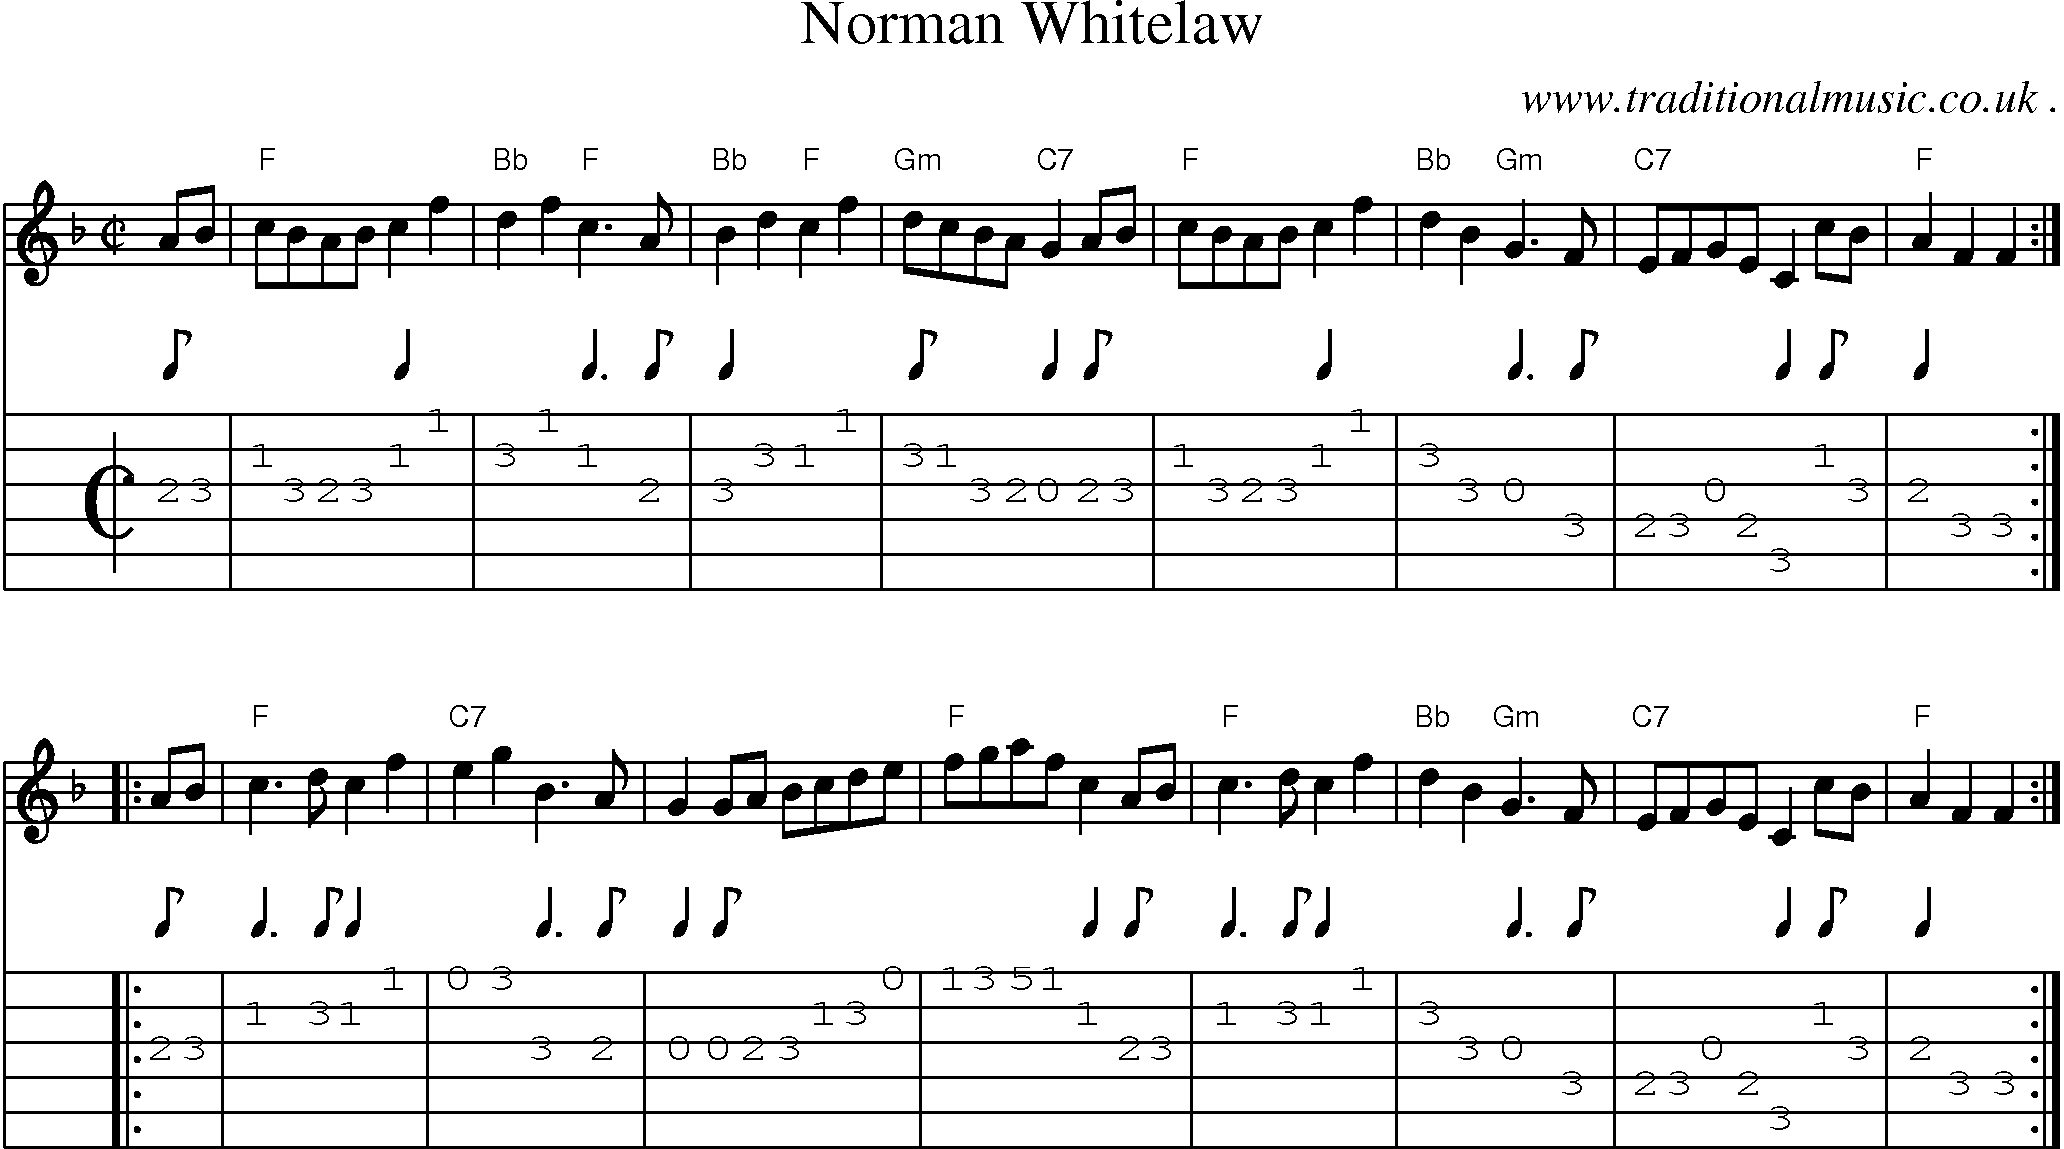 Sheet-music  score, Chords and Guitar Tabs for Norman Whitelaw